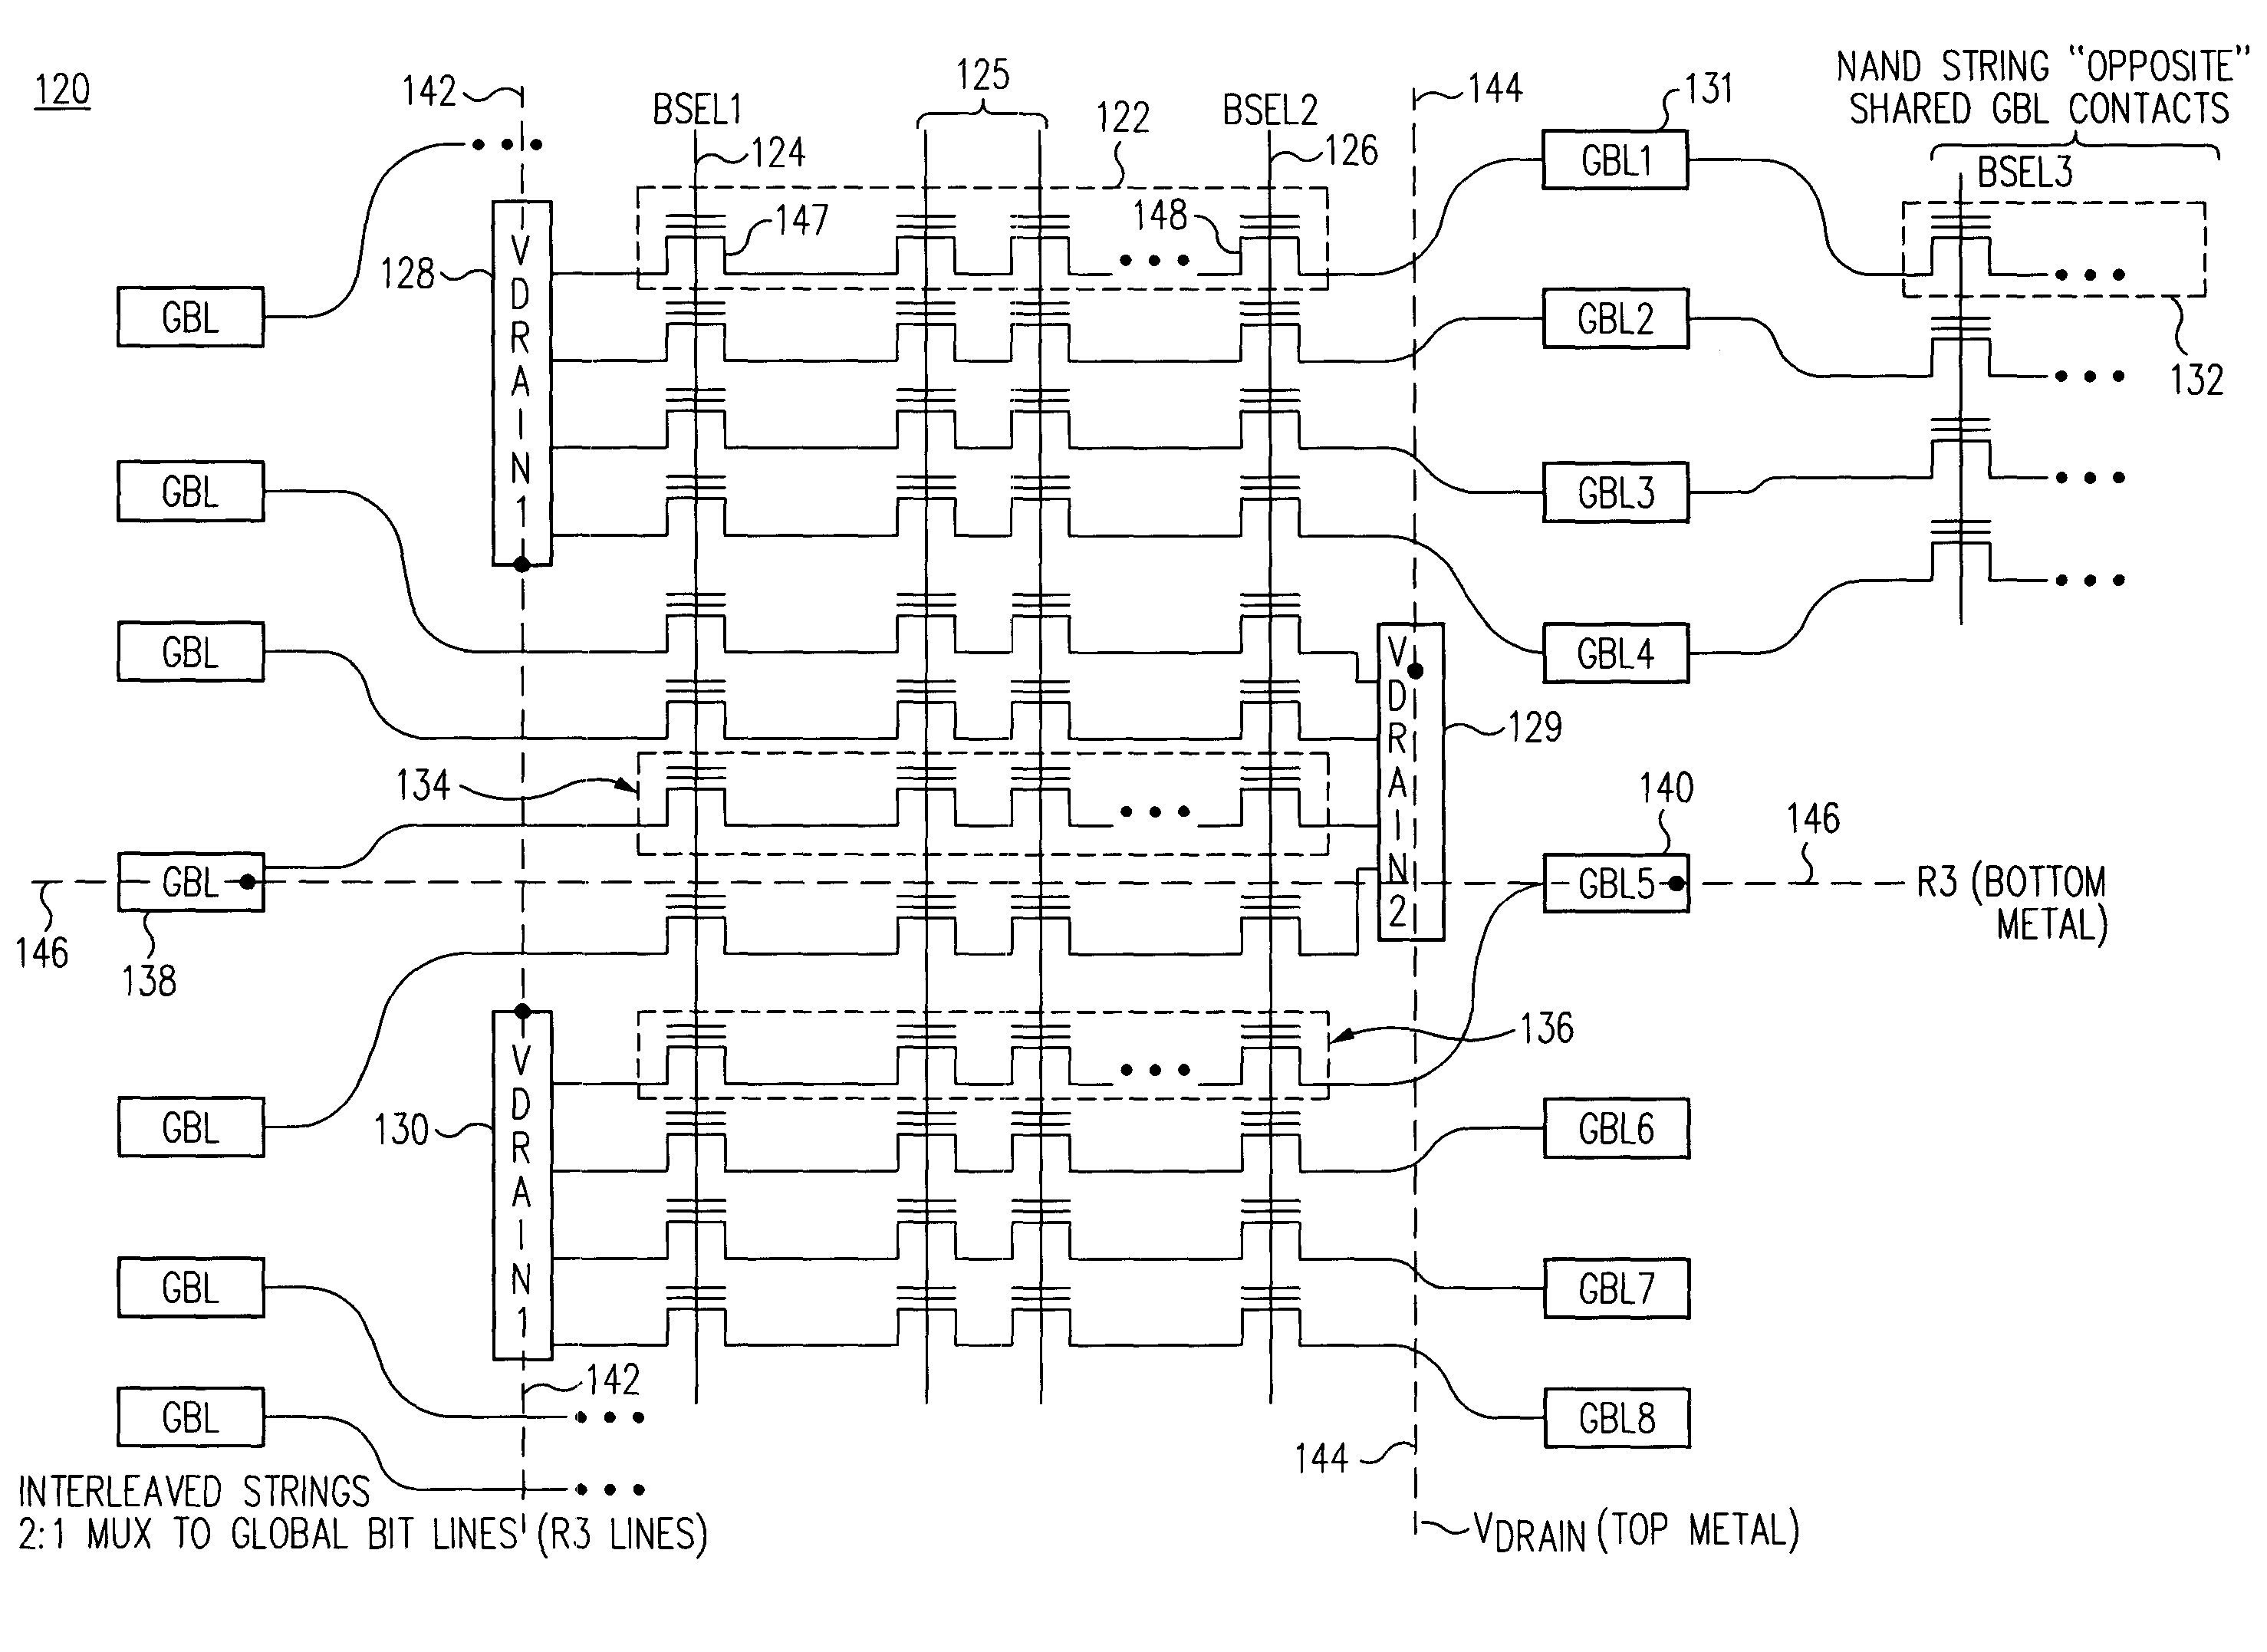 Programmable memory array structure incorporating series-connected transistor strings and methods for fabrication and operation of same